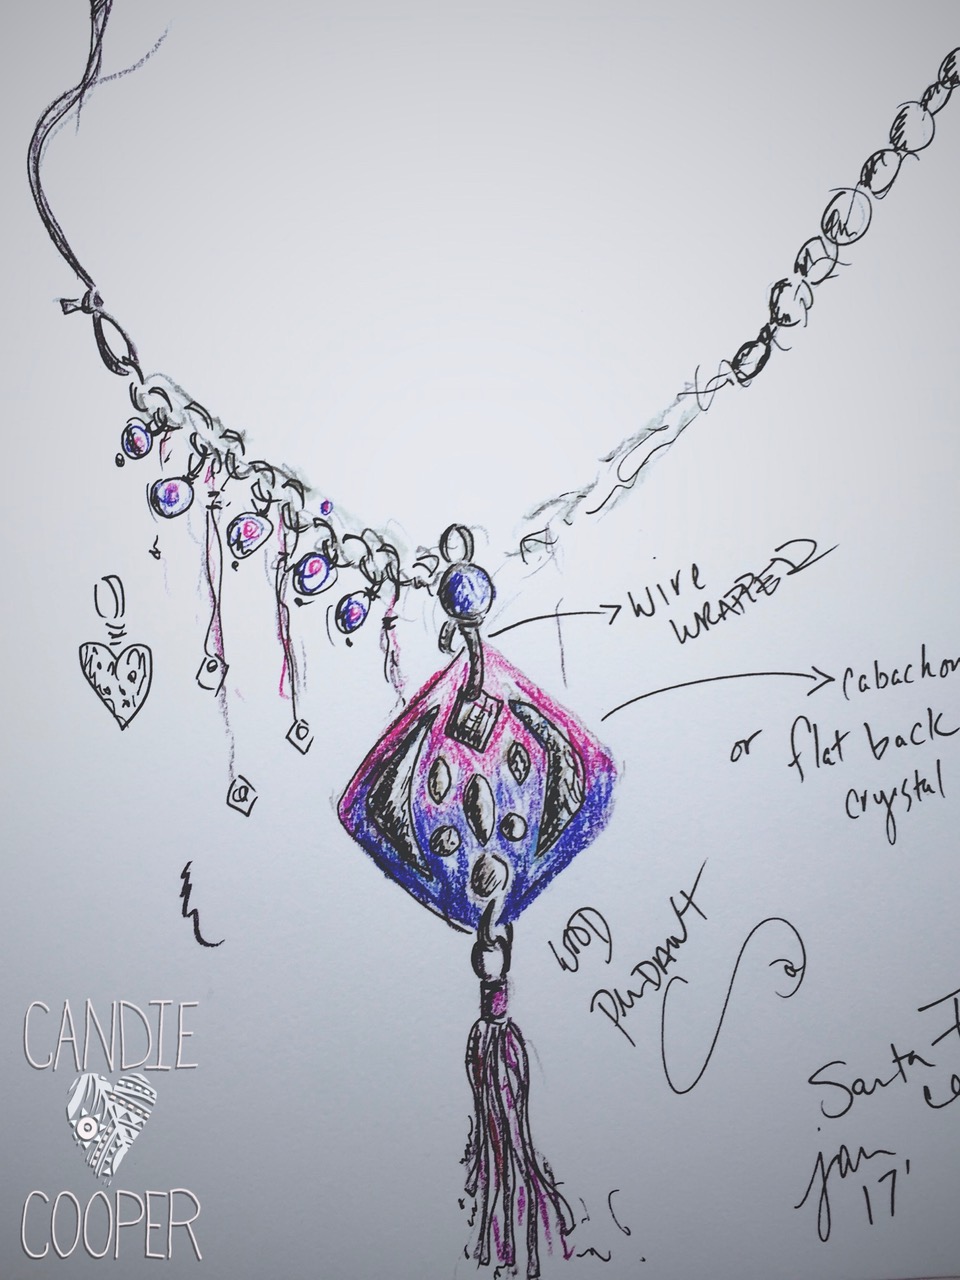 How to sketch your jewelry designs - Candie Cooper